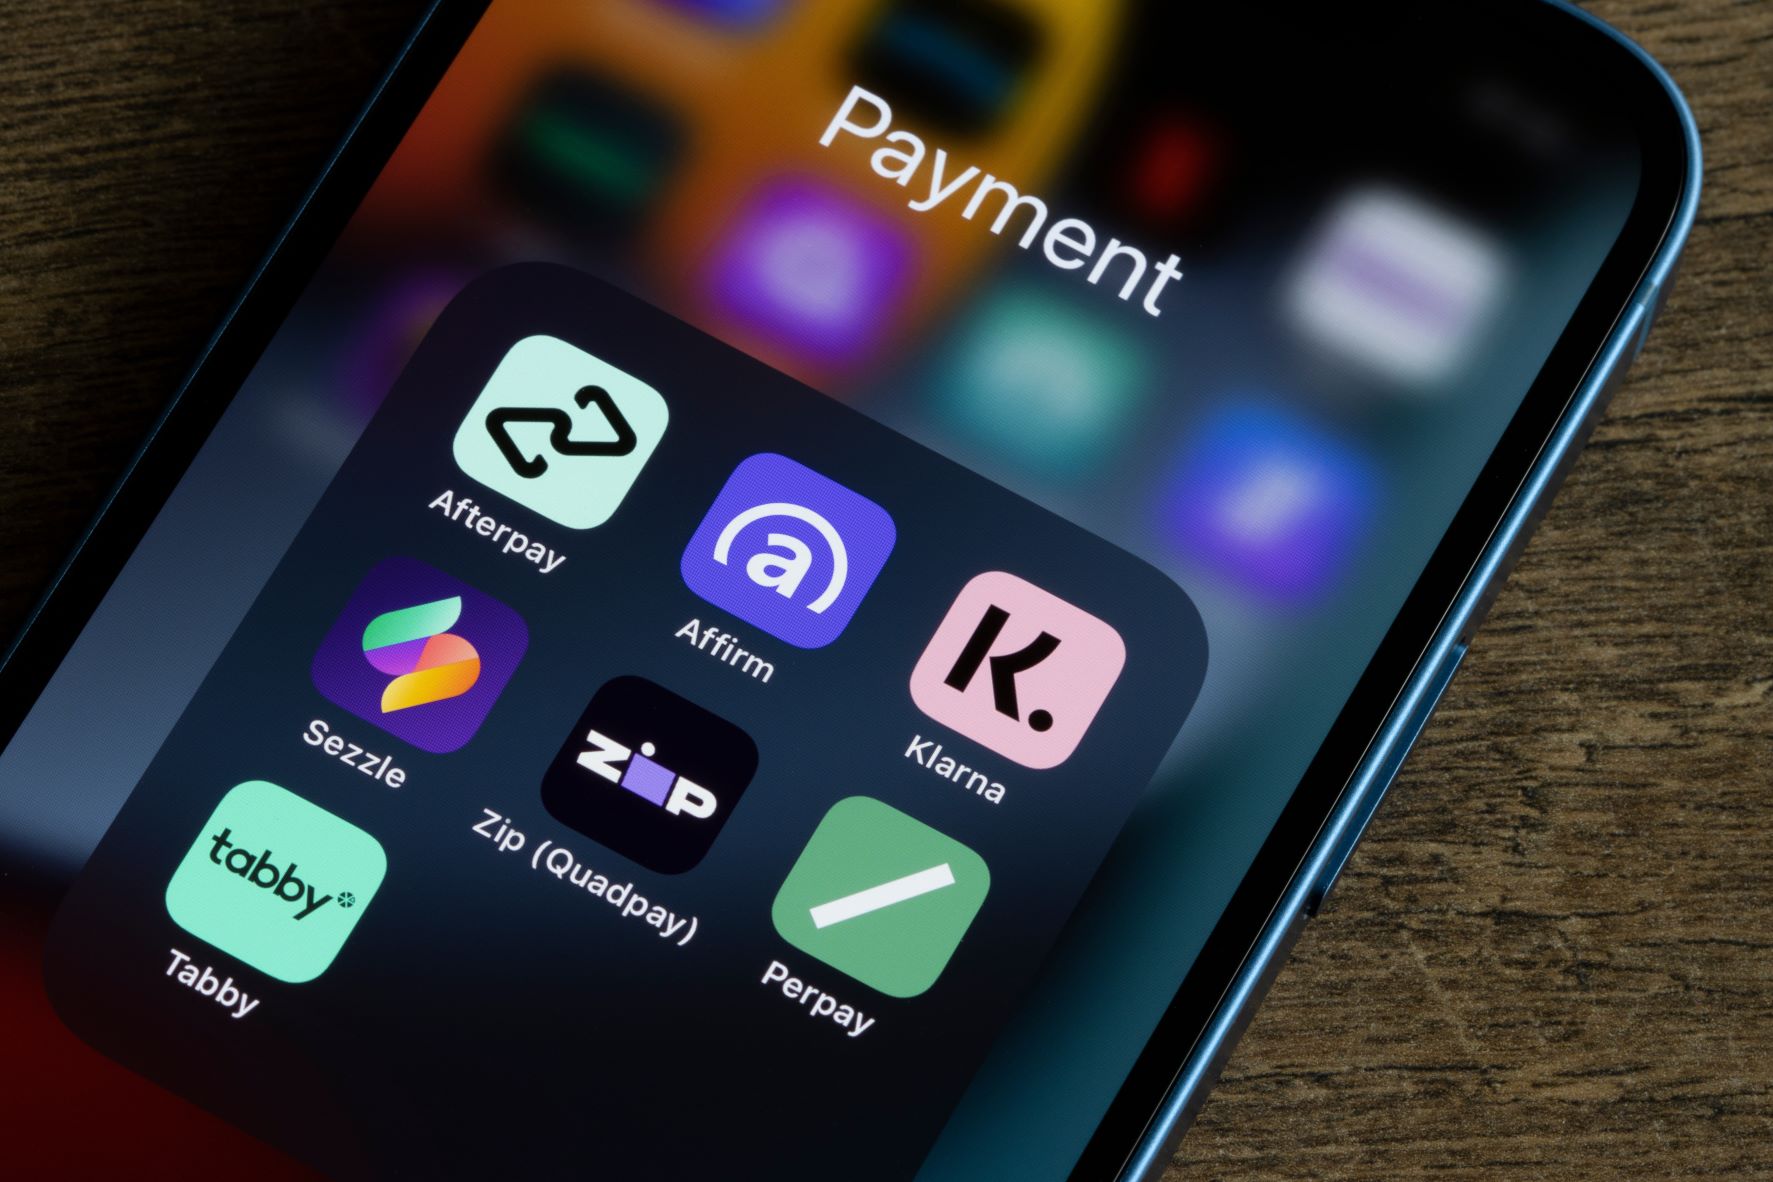 alternative payment method apps on a mobile phone screen